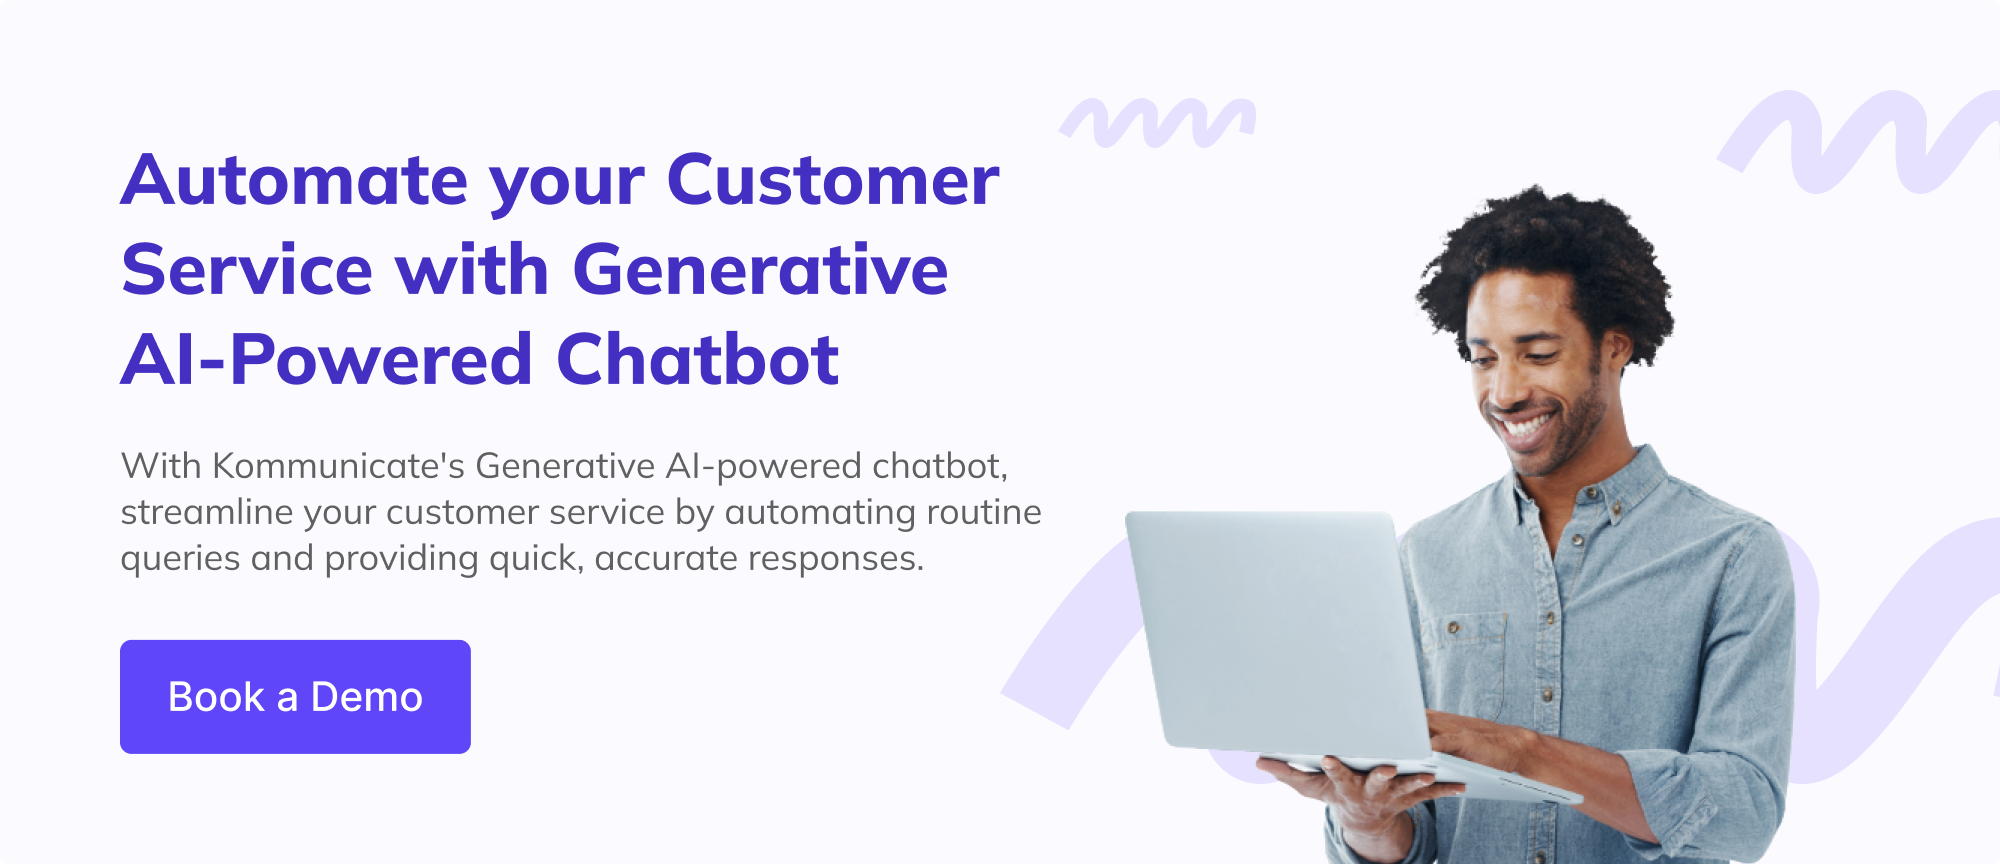 Marketing banner for an AI-powered customer service chatbot. The image features a smiling African American man using a laptop. Text promotes automating customer service with a generative AI-powered chatbot to streamline operations and provide quick, accurate responses. A 